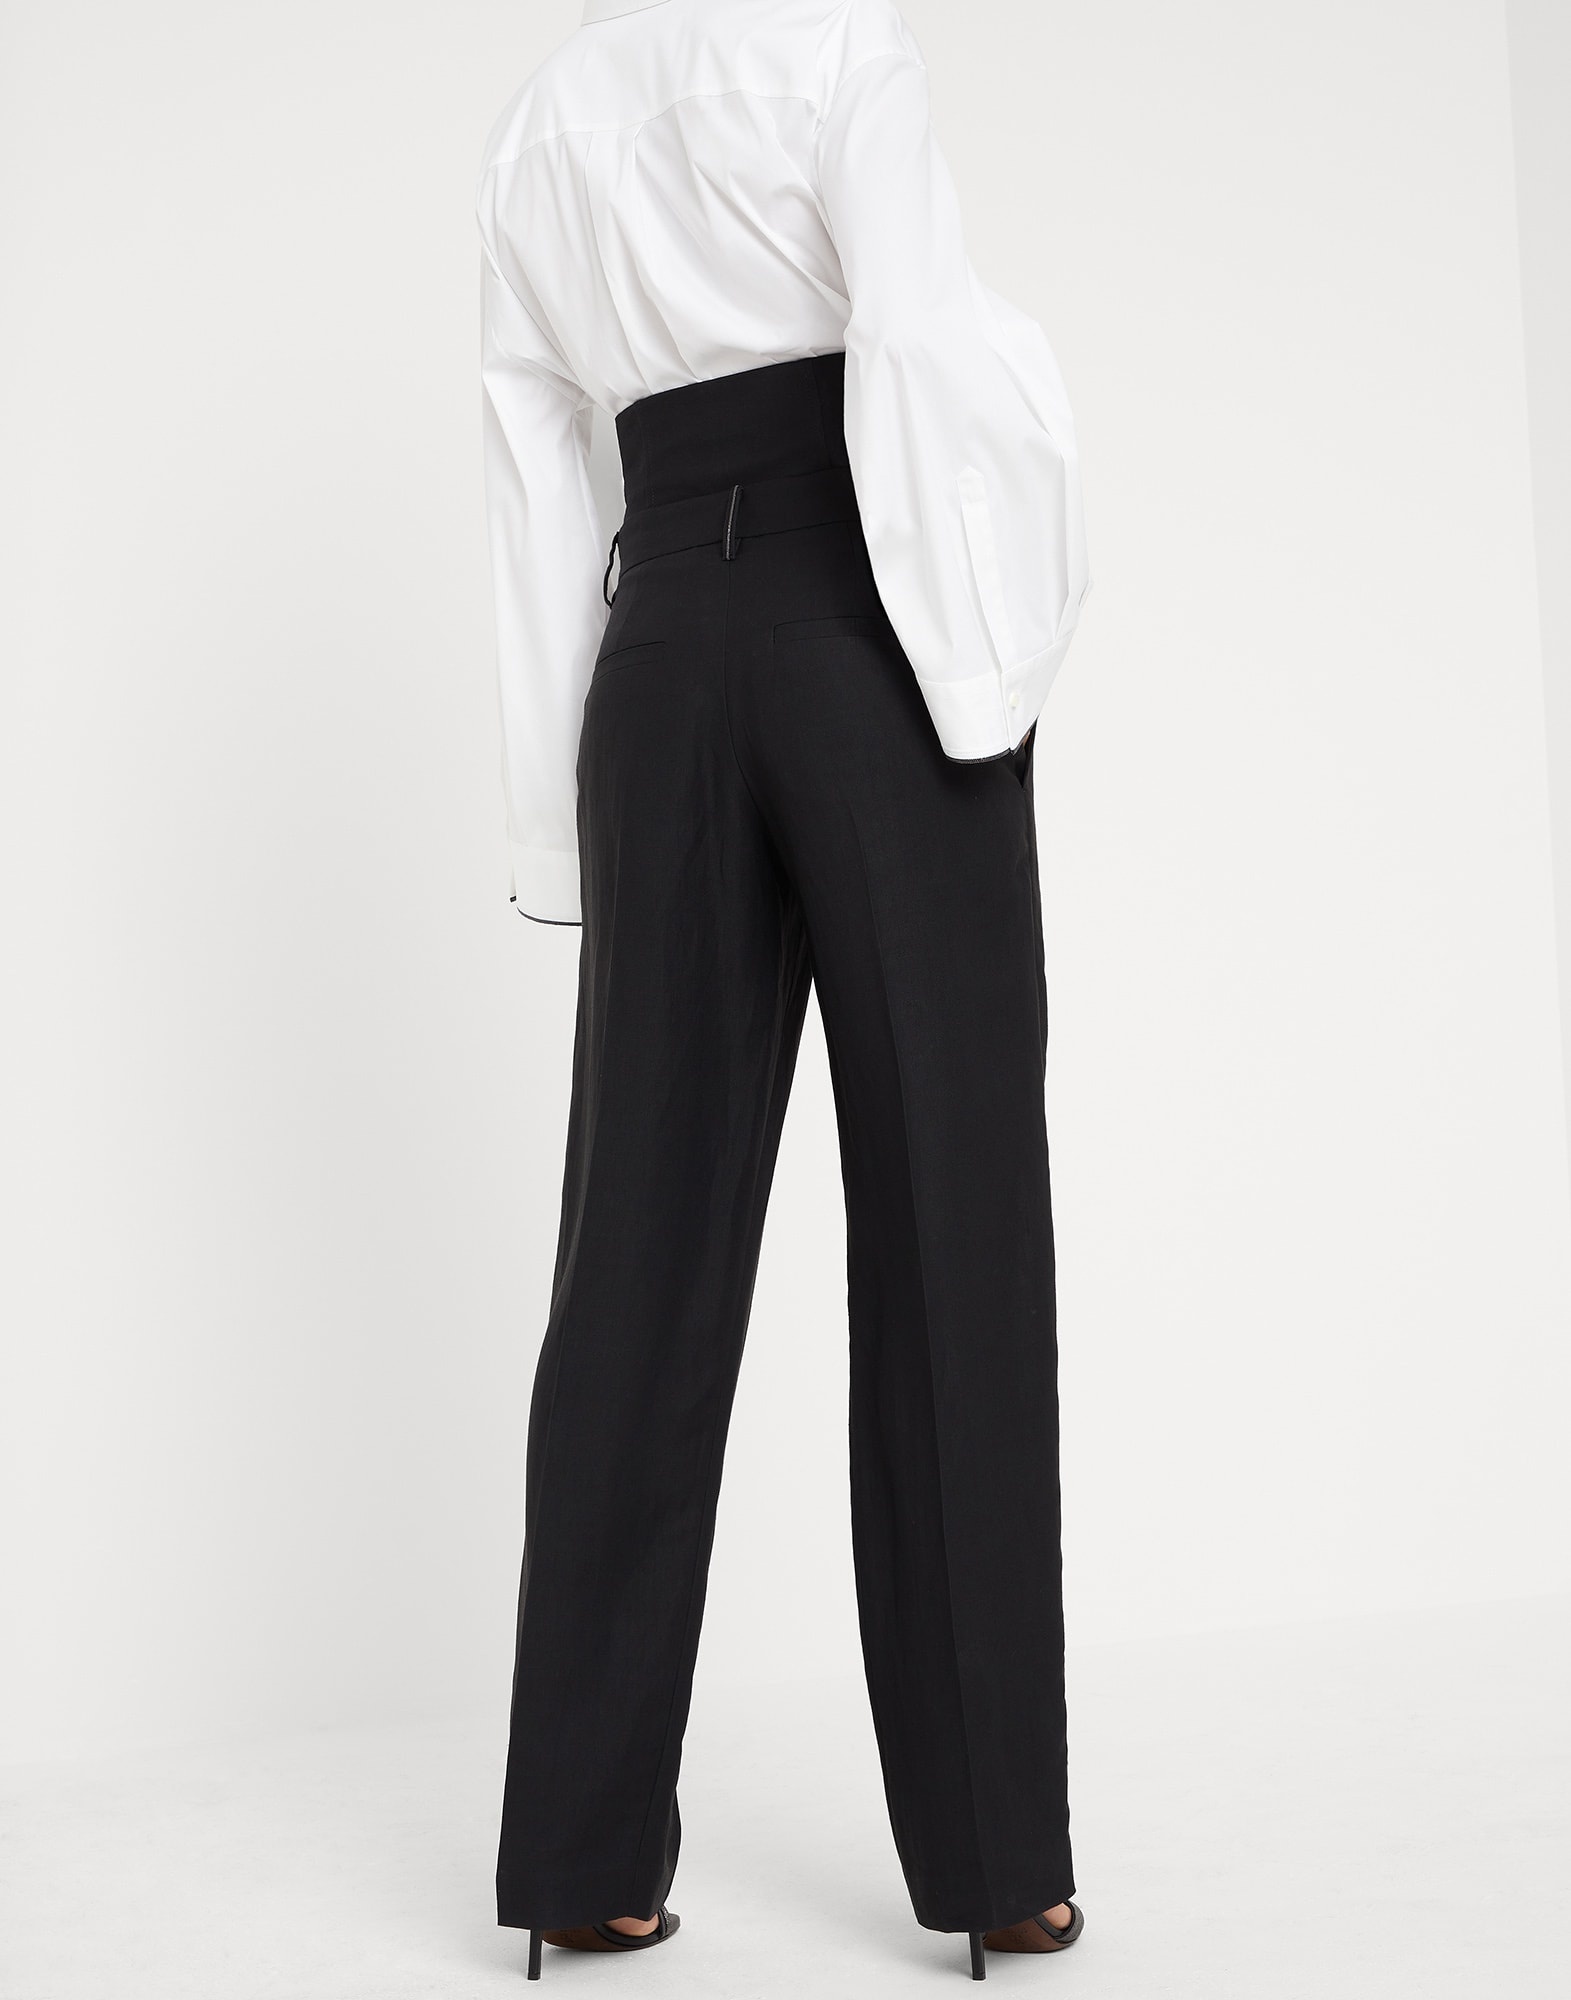 Viscose and linen fluid twill loose straight trousers with removable corset waistband and monili - 2